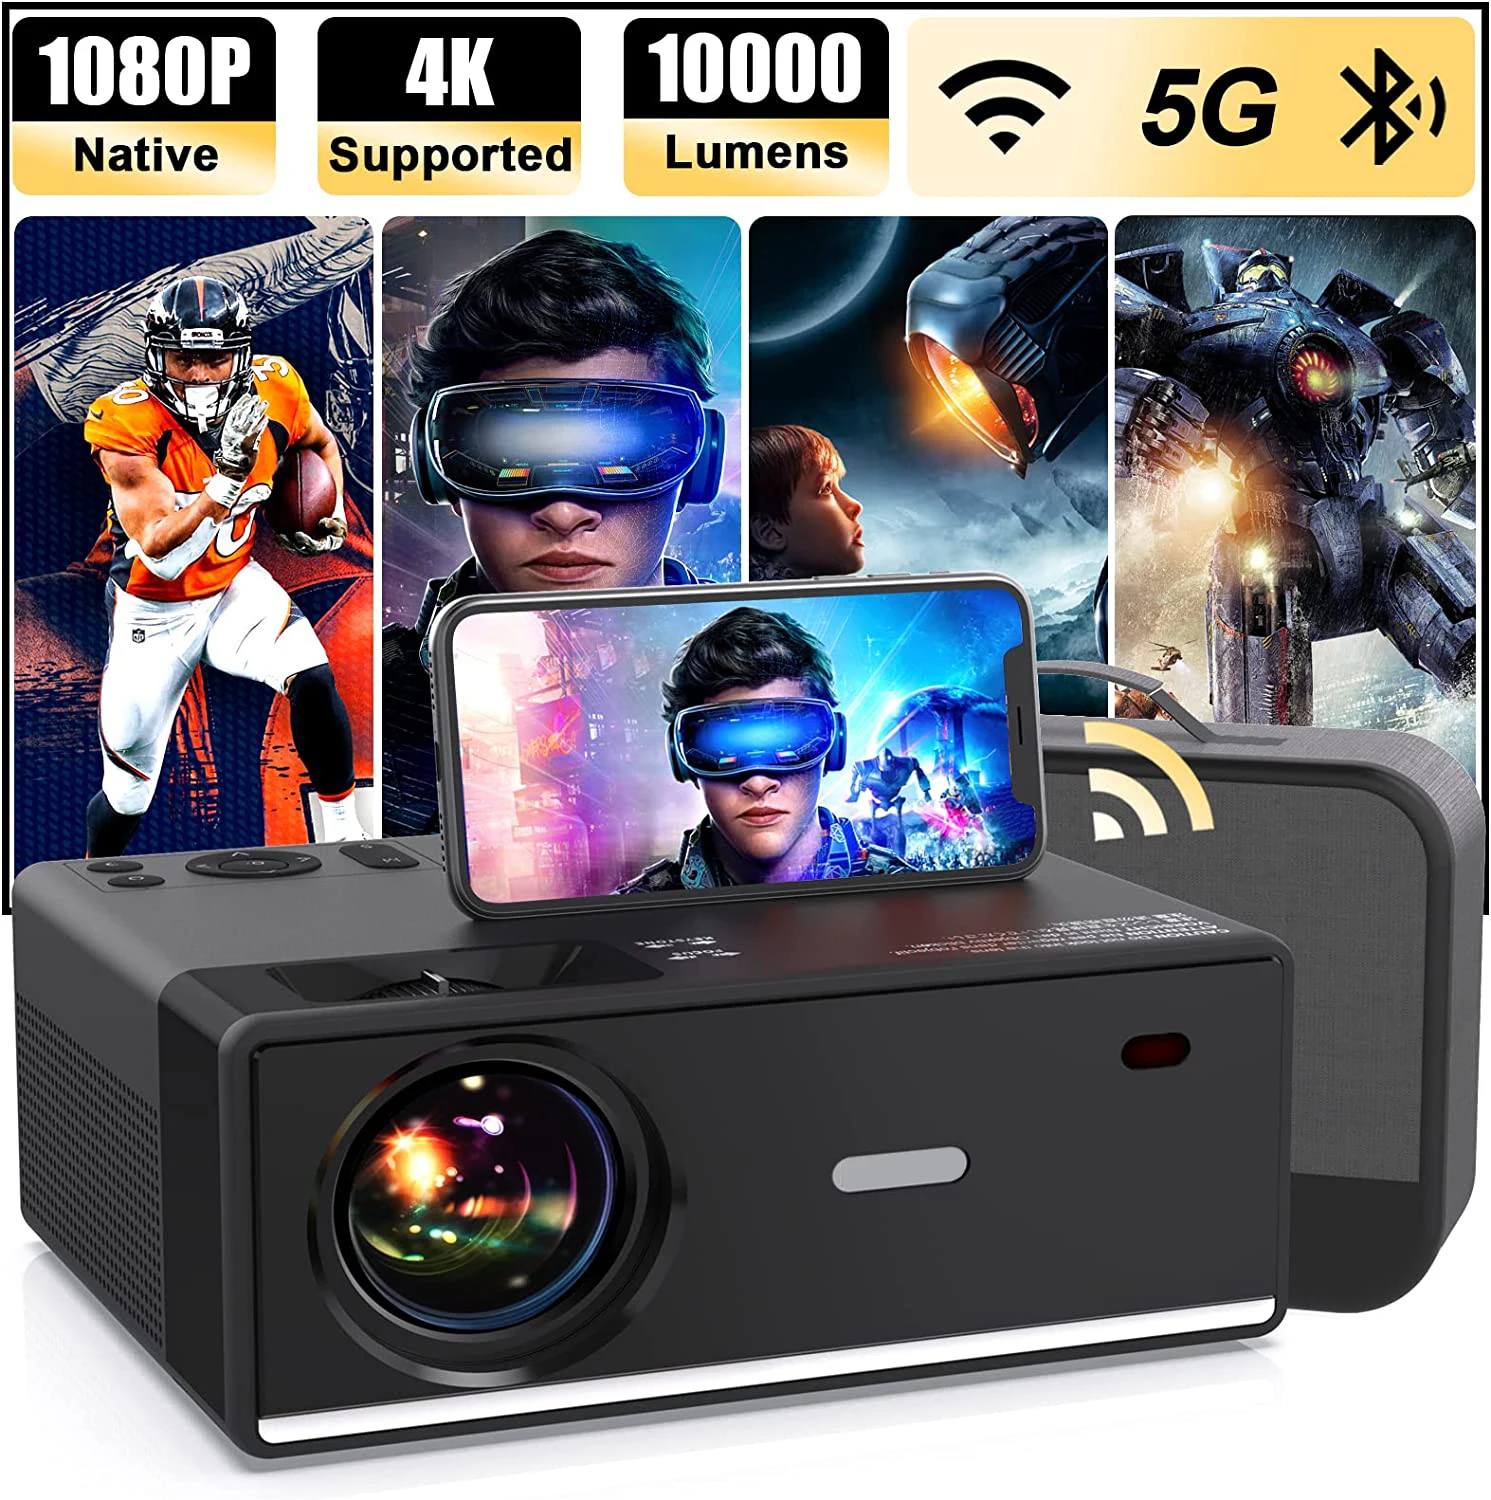 Projector Smart Tv 1080p Projector Native 10000 Lumens Led Home Cinema Beamer Projector For Android Phone Iphone